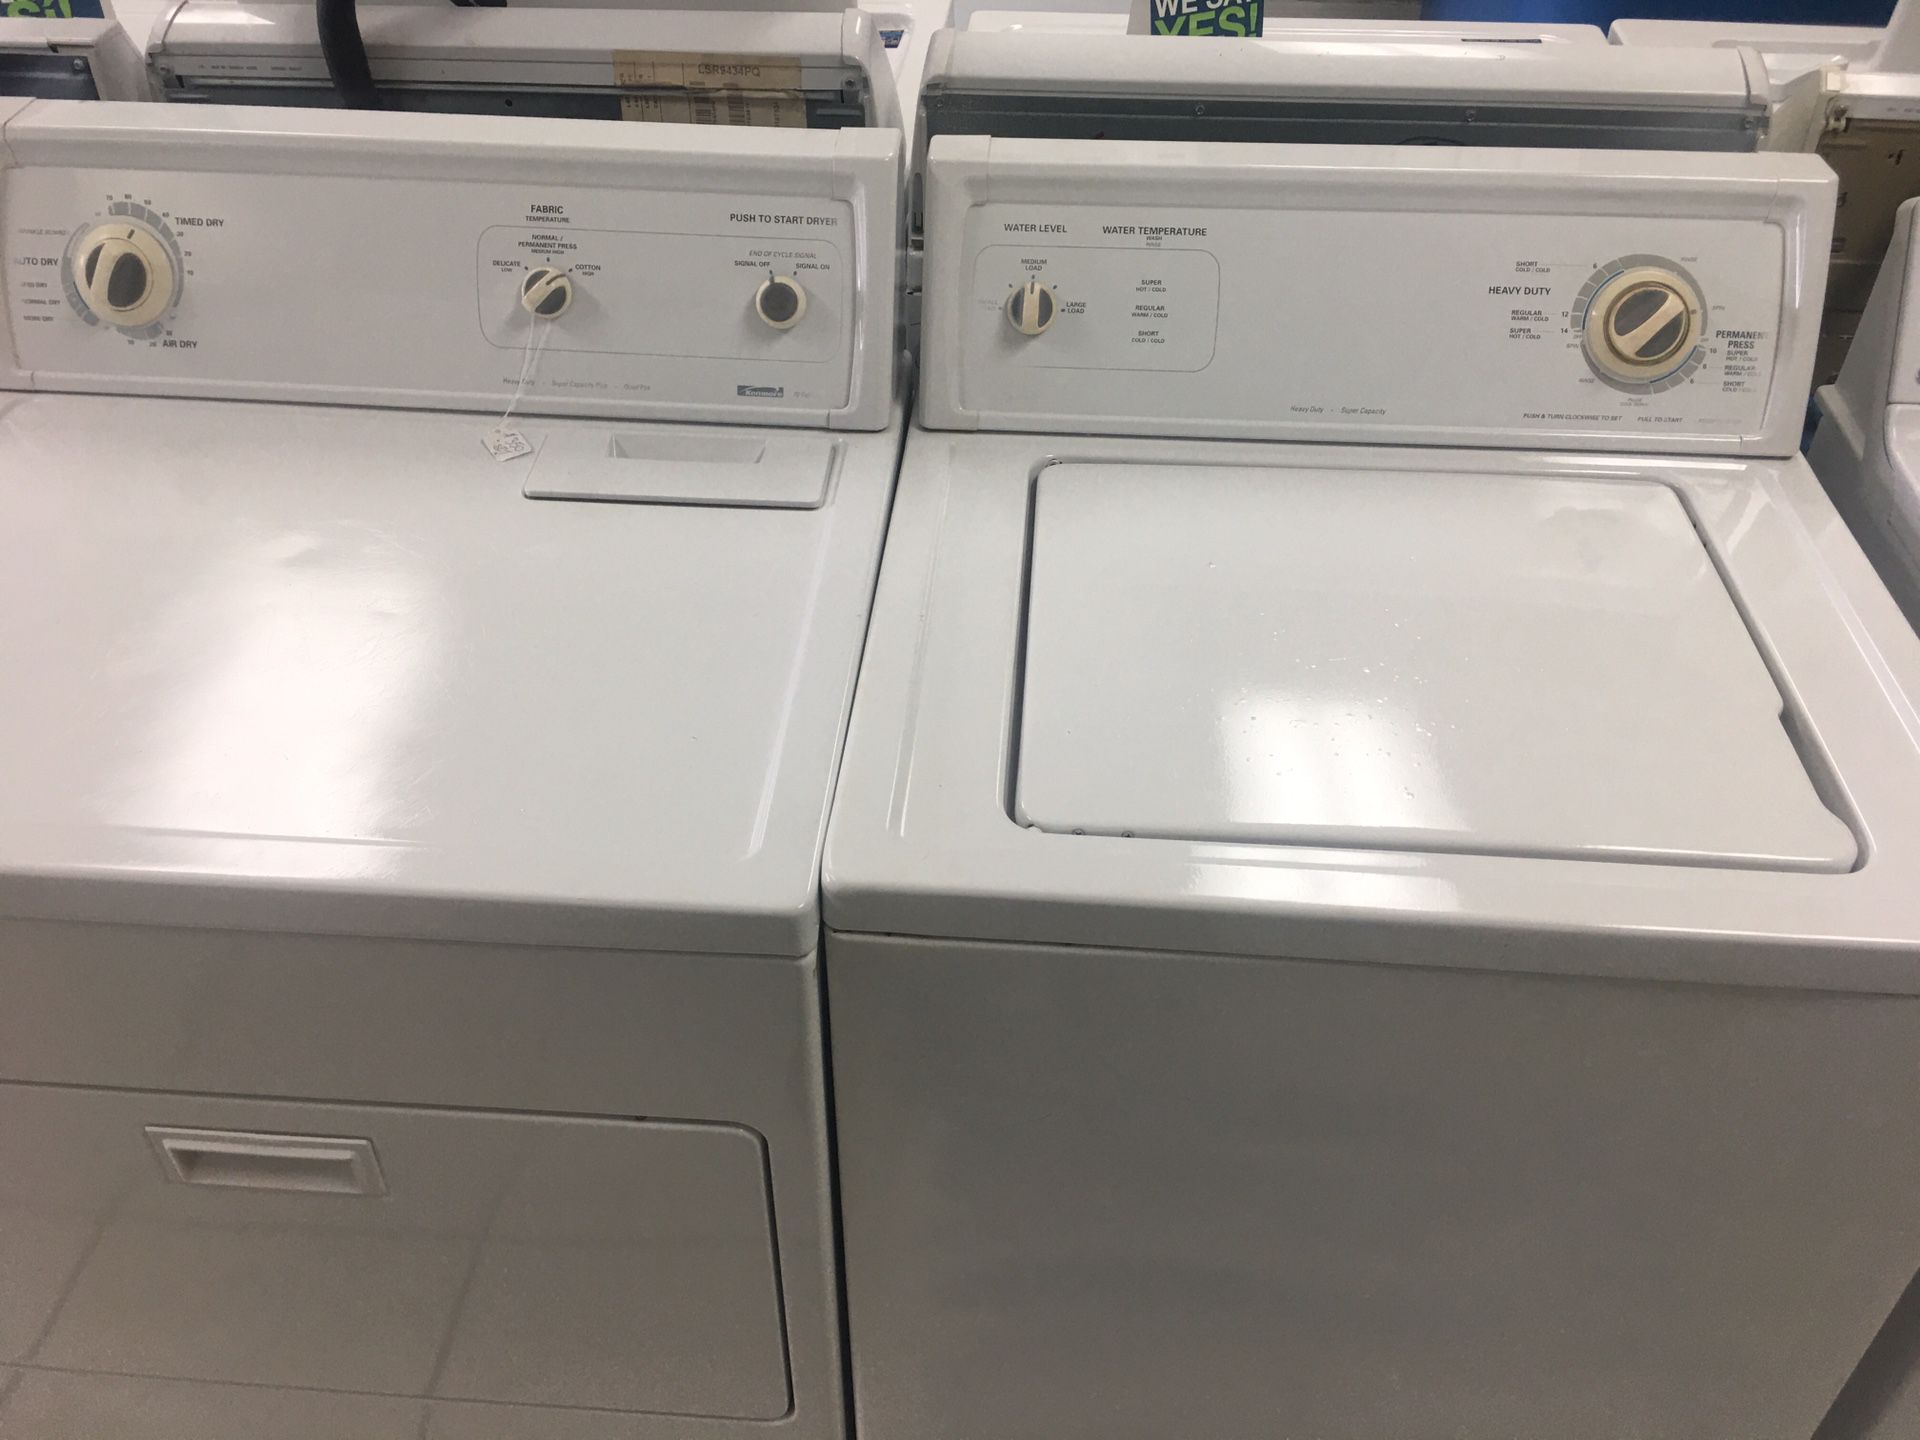 Kenmore washer and dryer set